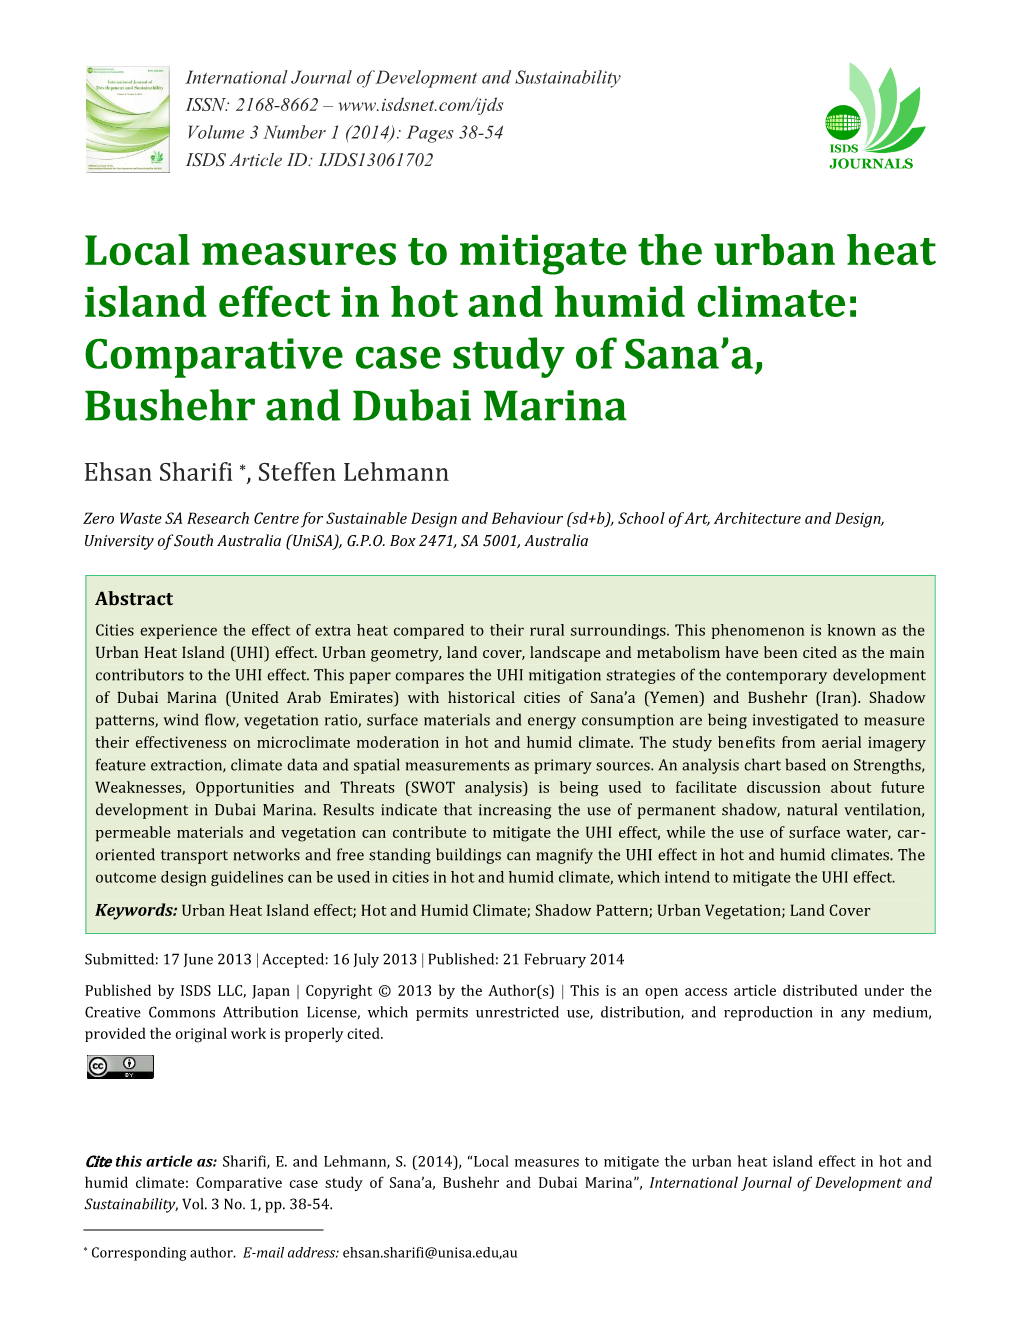 Local Measures to Mitigate the Urban Heat Island Effect in Hot and Humid Climate: Comparative Case Study of Sana’A, Bushehr and Dubai Marina